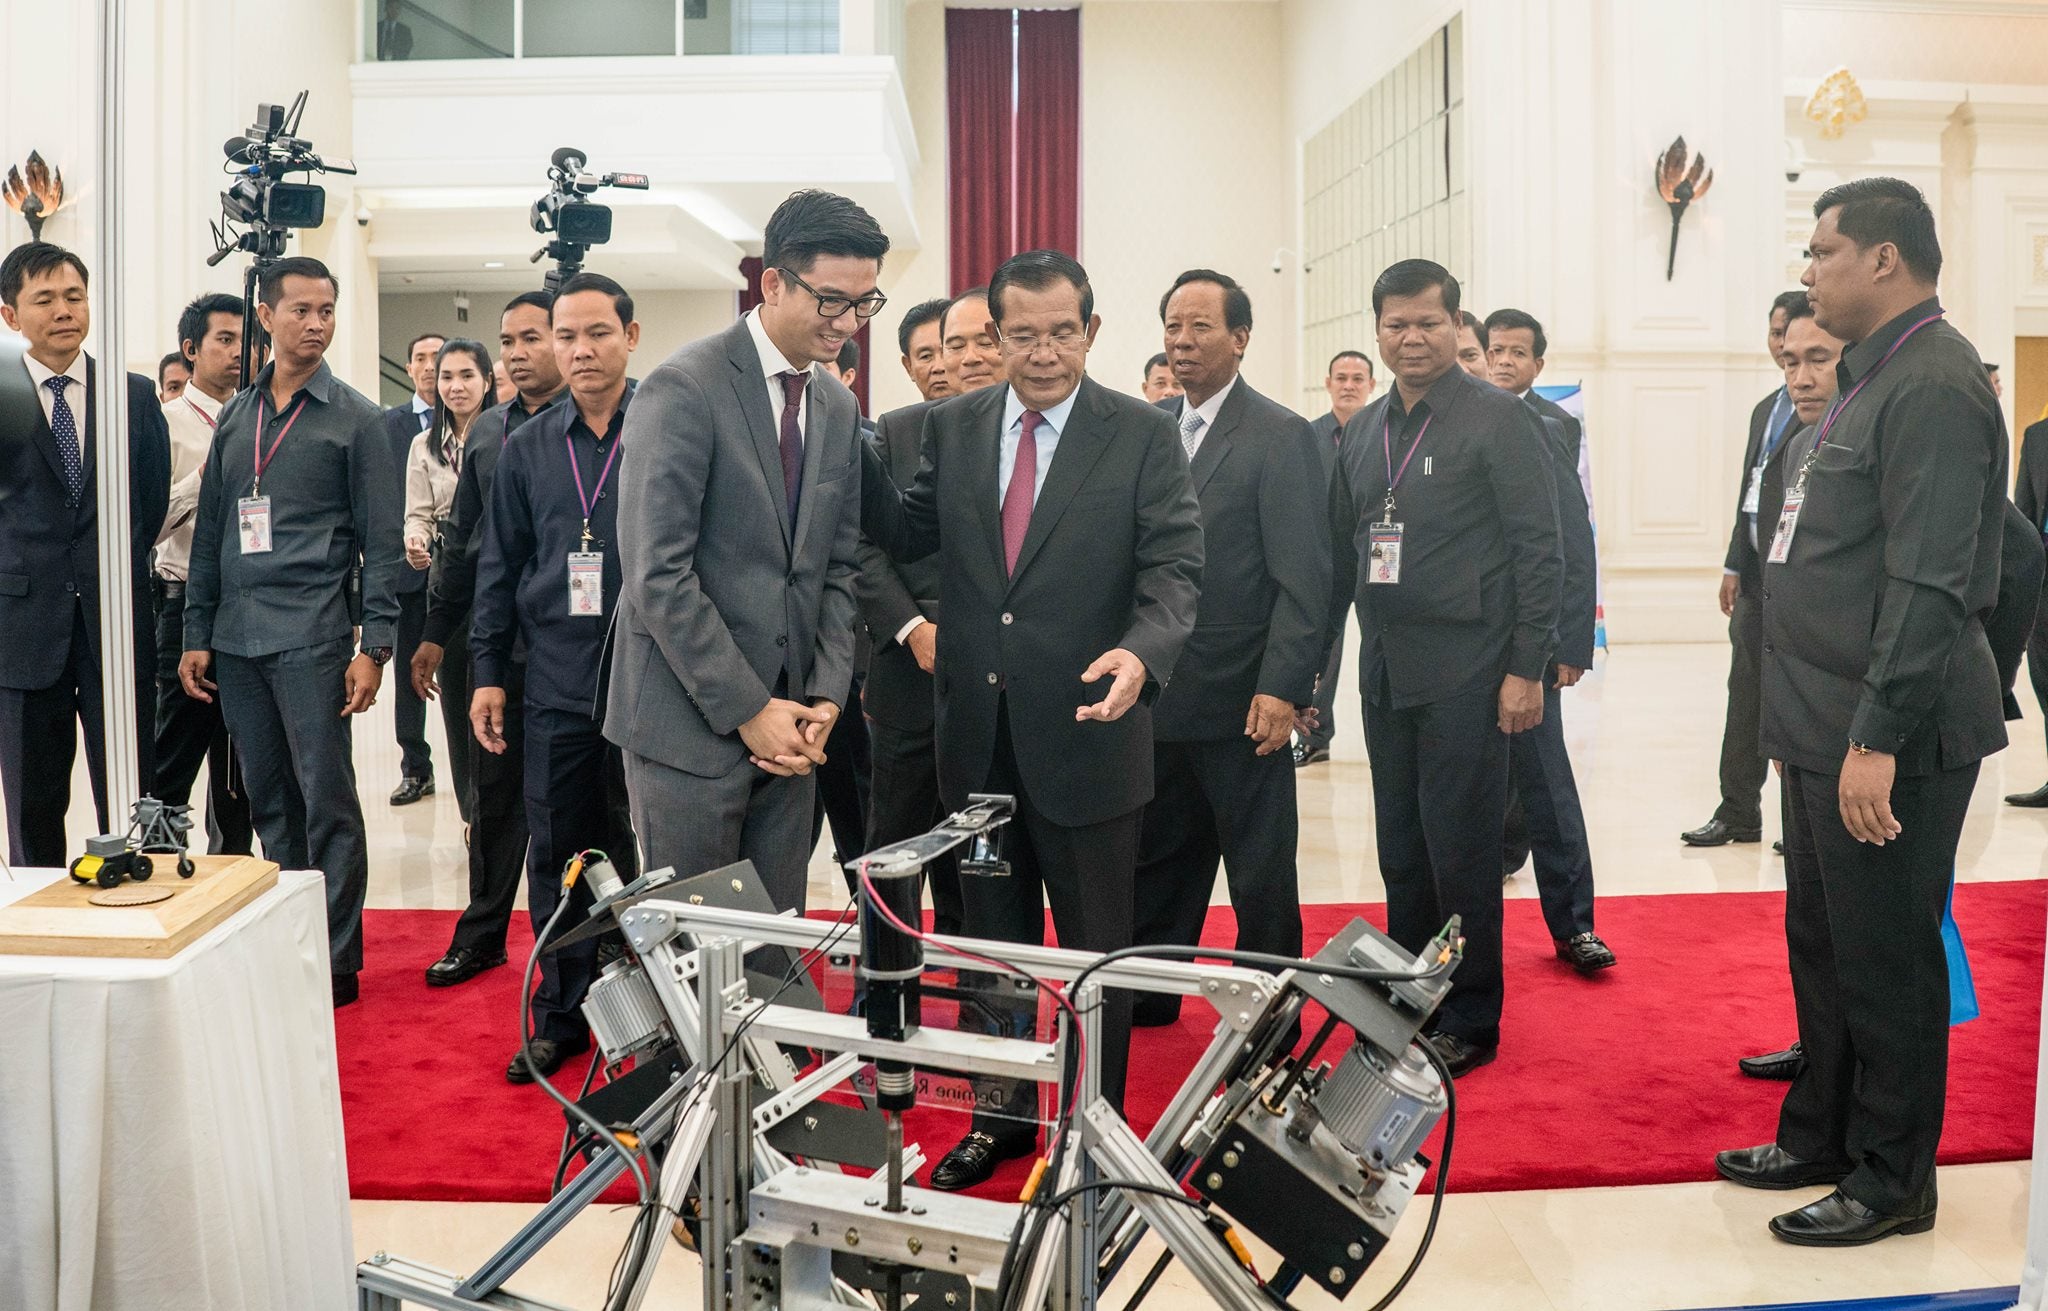 Richard Yim showing the Cambodian Prime Minister Demine's excavator